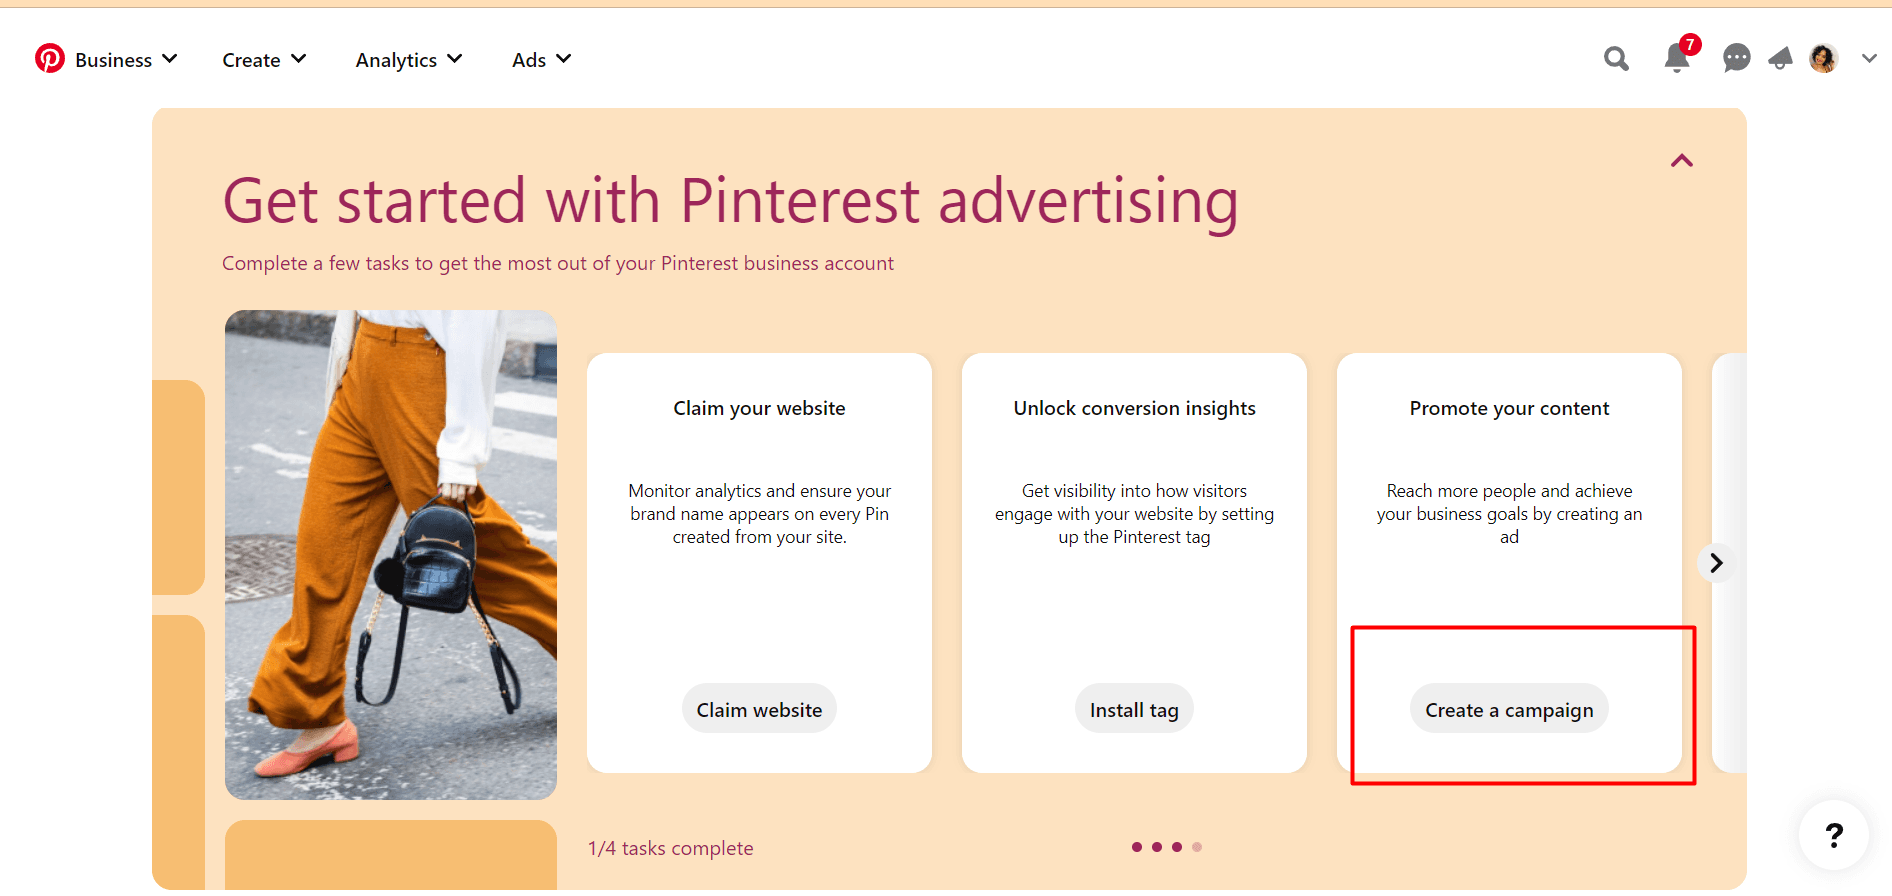 Pinterest Ads - Create an Ad Campaign